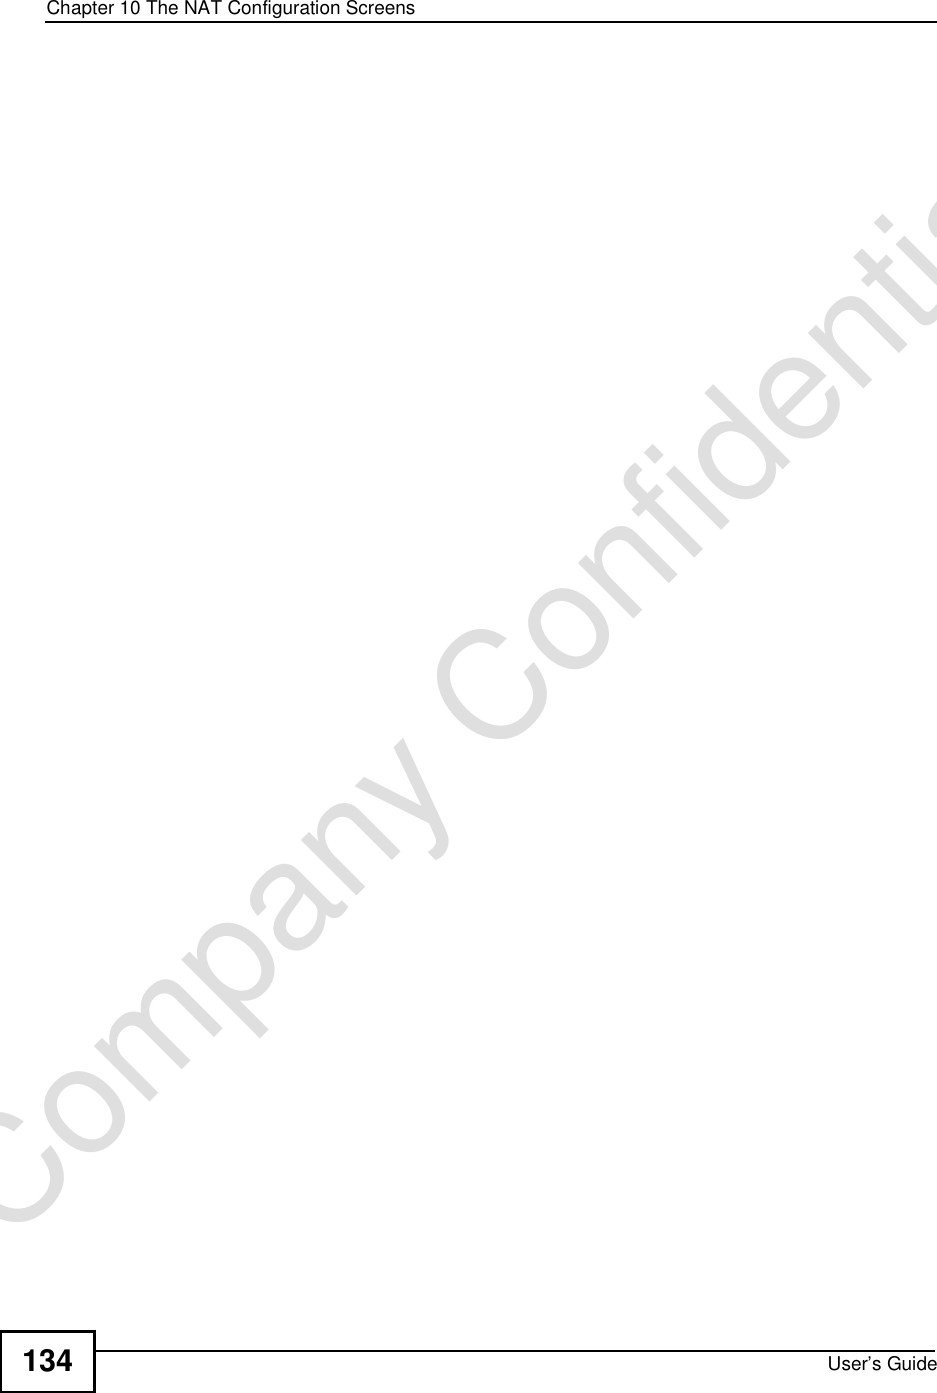 Chapter 10The NAT Configuration ScreensUser’s Guide134Company Confidential